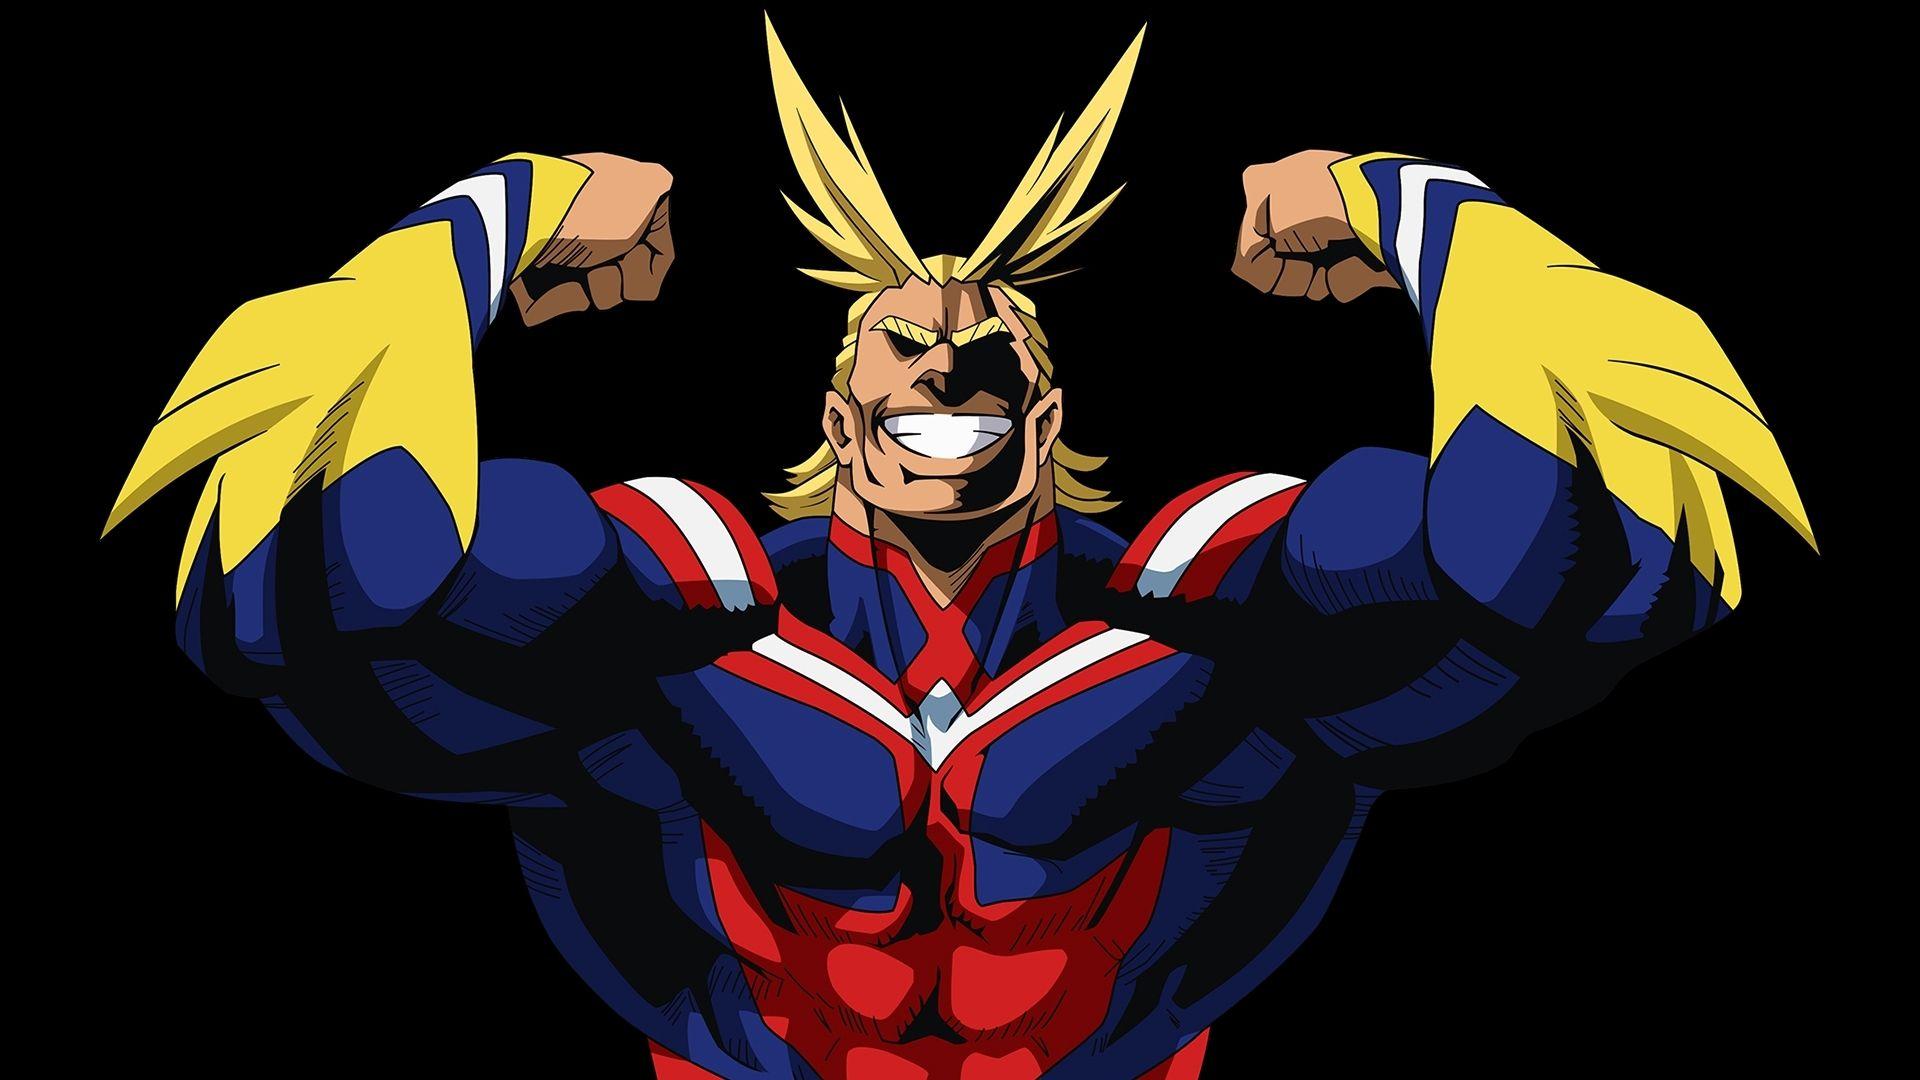 Deku and All Might Wallpapers - Top Free Deku and All Might Backgrounds